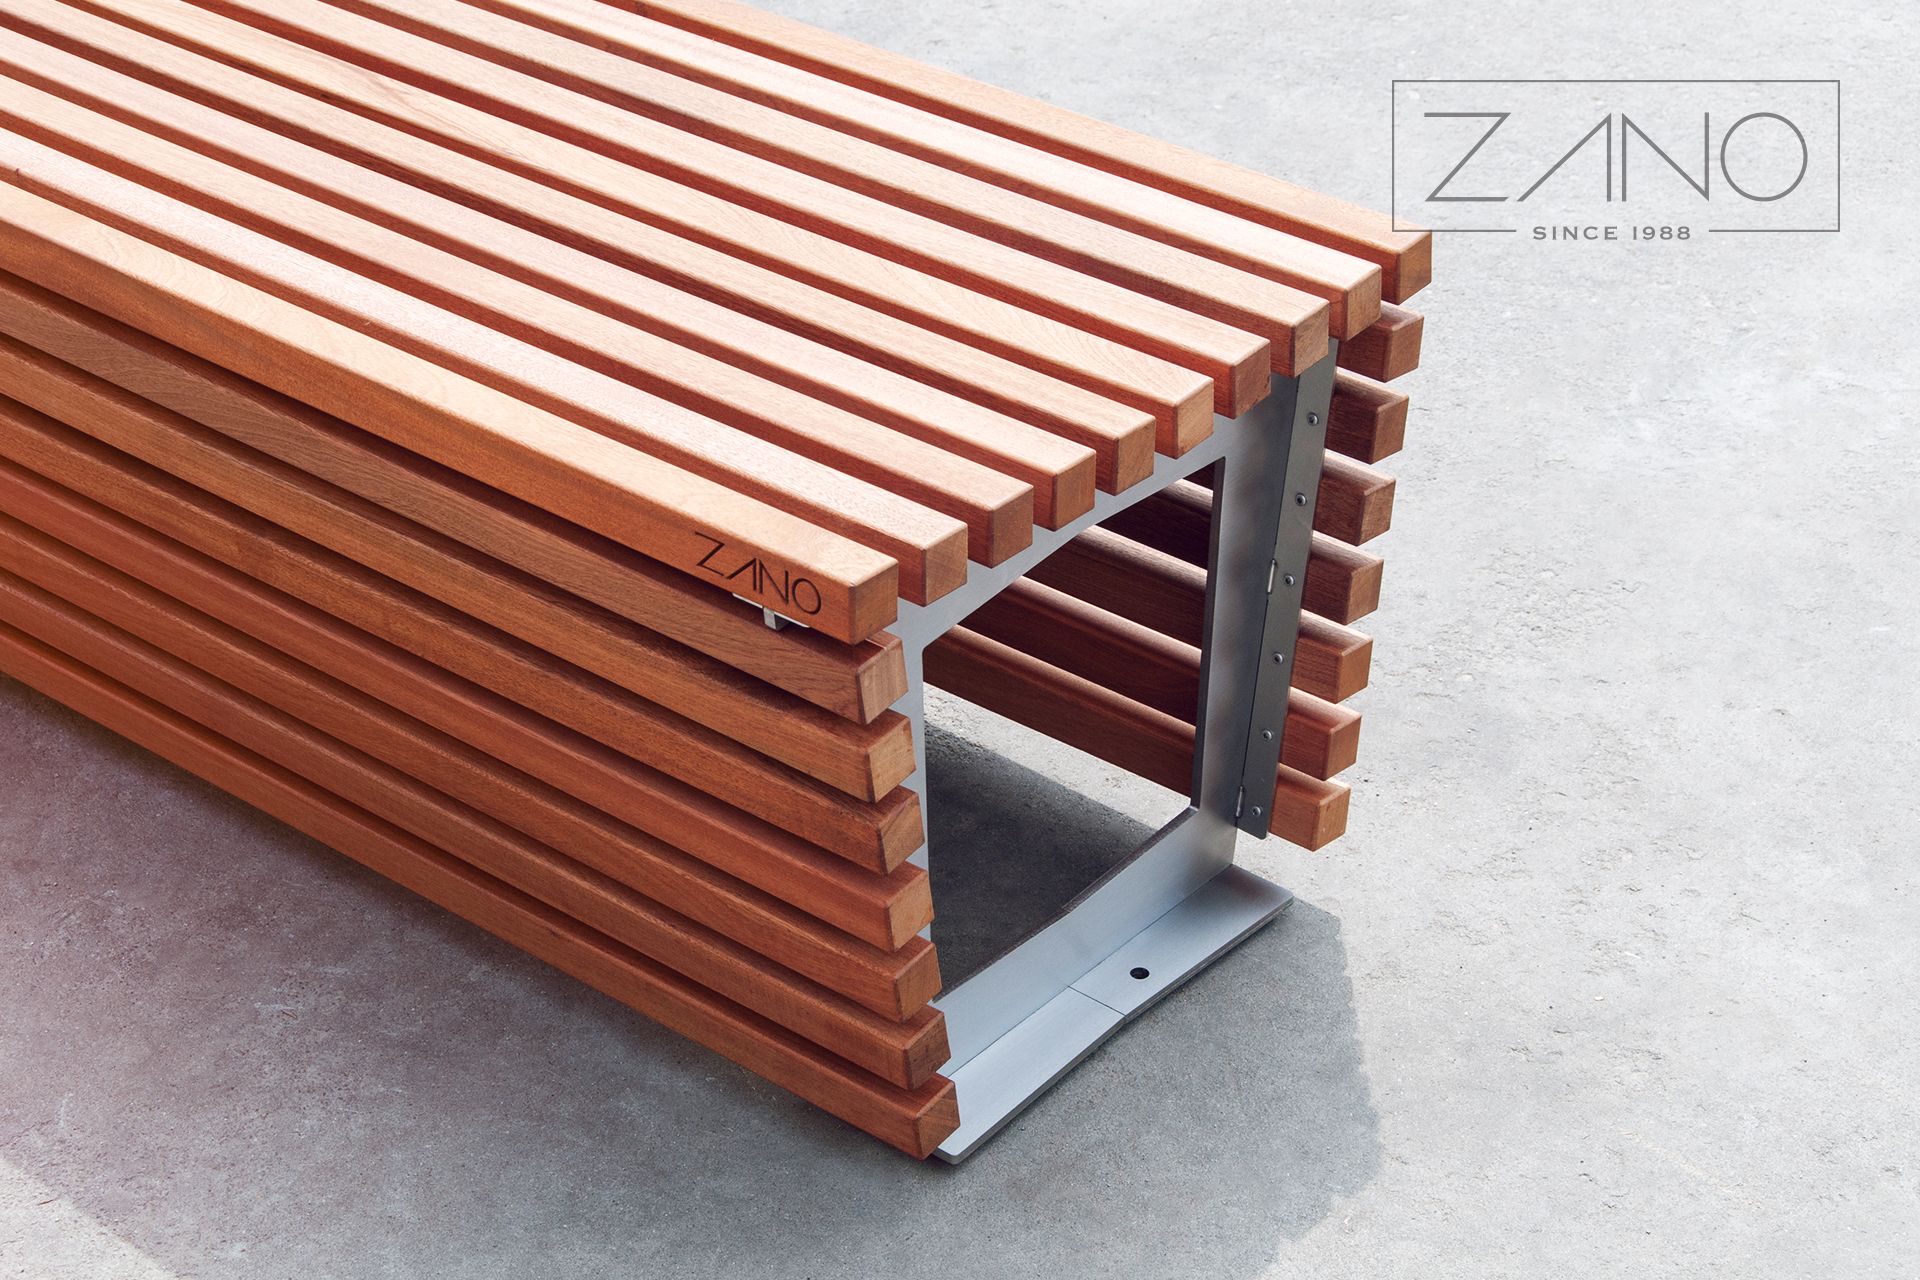 Park bench made of steel and hardwood